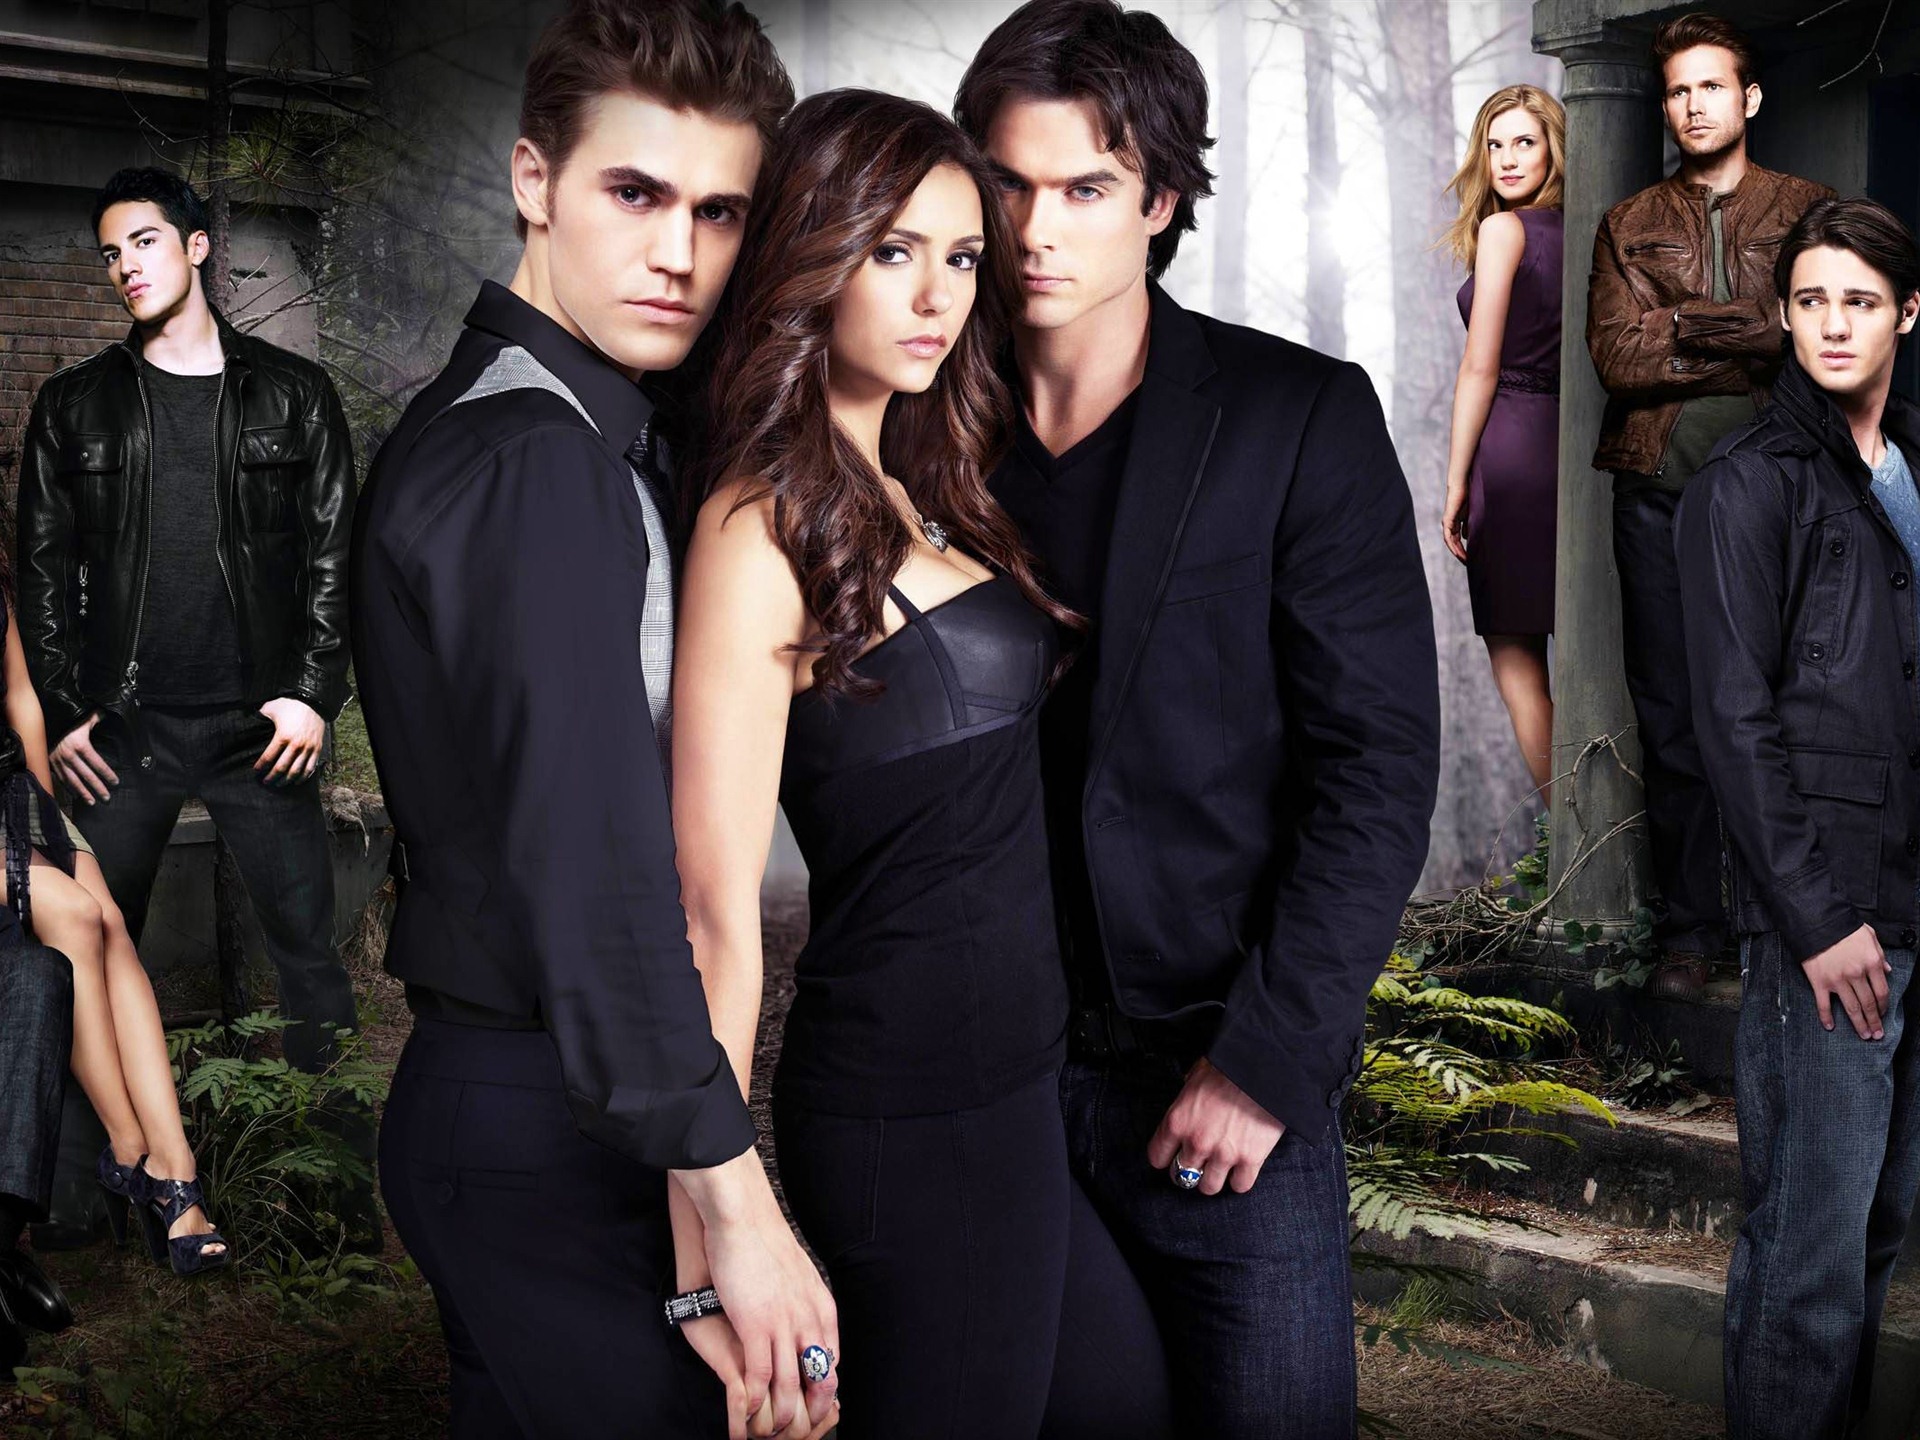 The Vampire Diaries HD Wallpapers #12 - 1920x1440